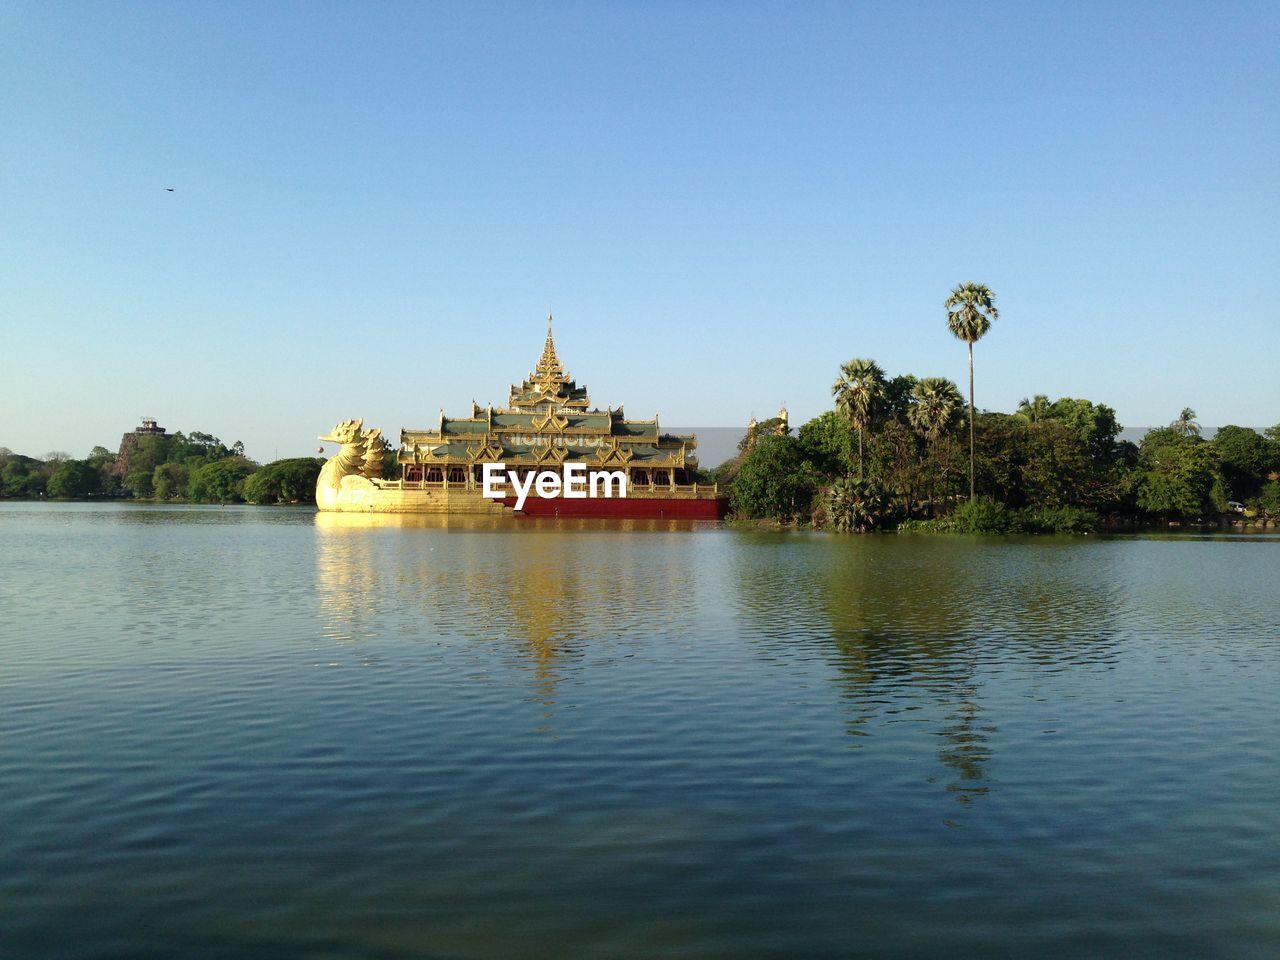 VIEW OF A LAKE WITH TEMPLE